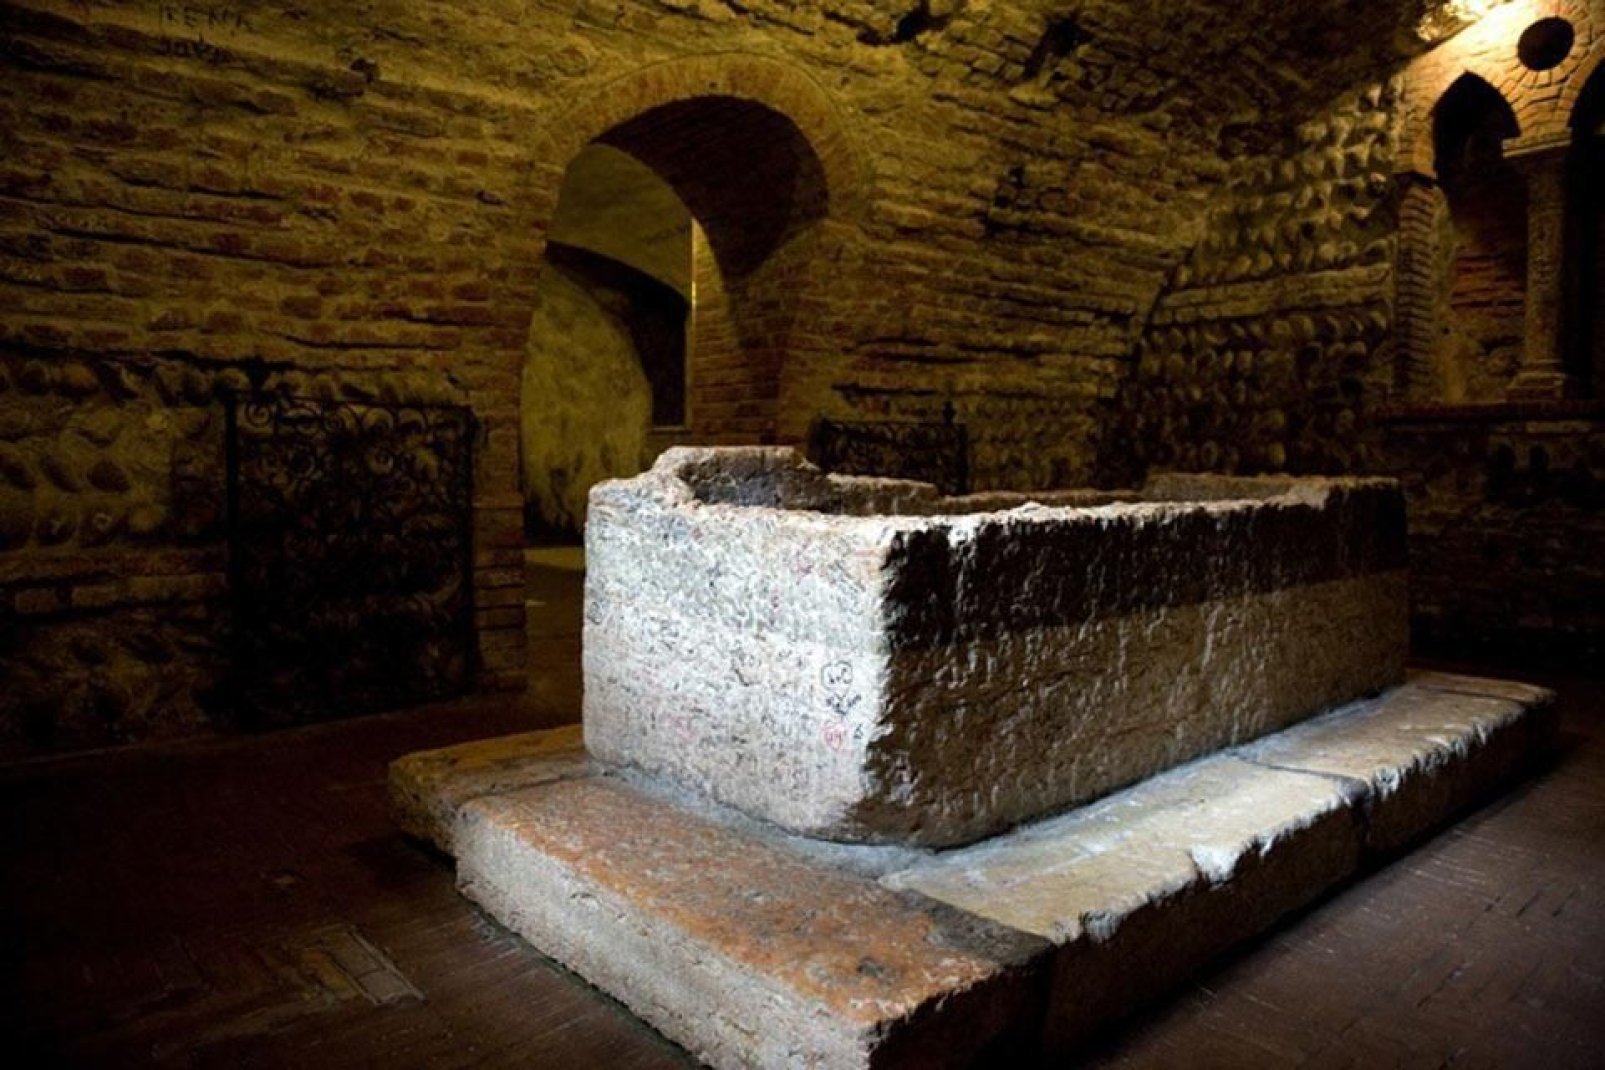 The tomb has, since 1937, been situated in an ancient monastery.